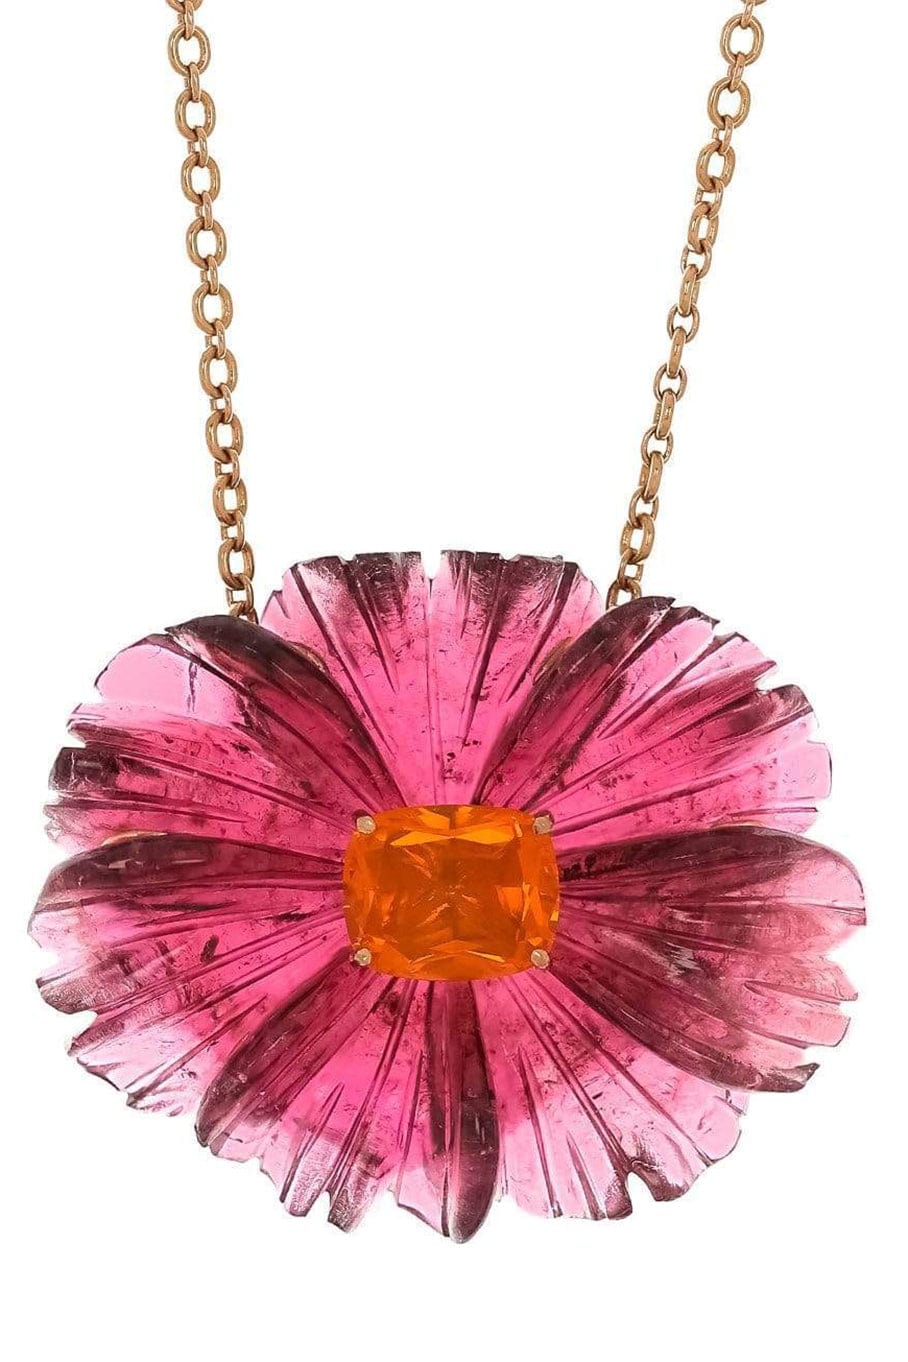 IRENE NEUWIRTH JEWELRY-Carved Pink Tourmaline Tropical Flower Necklace-ROSE GOLD